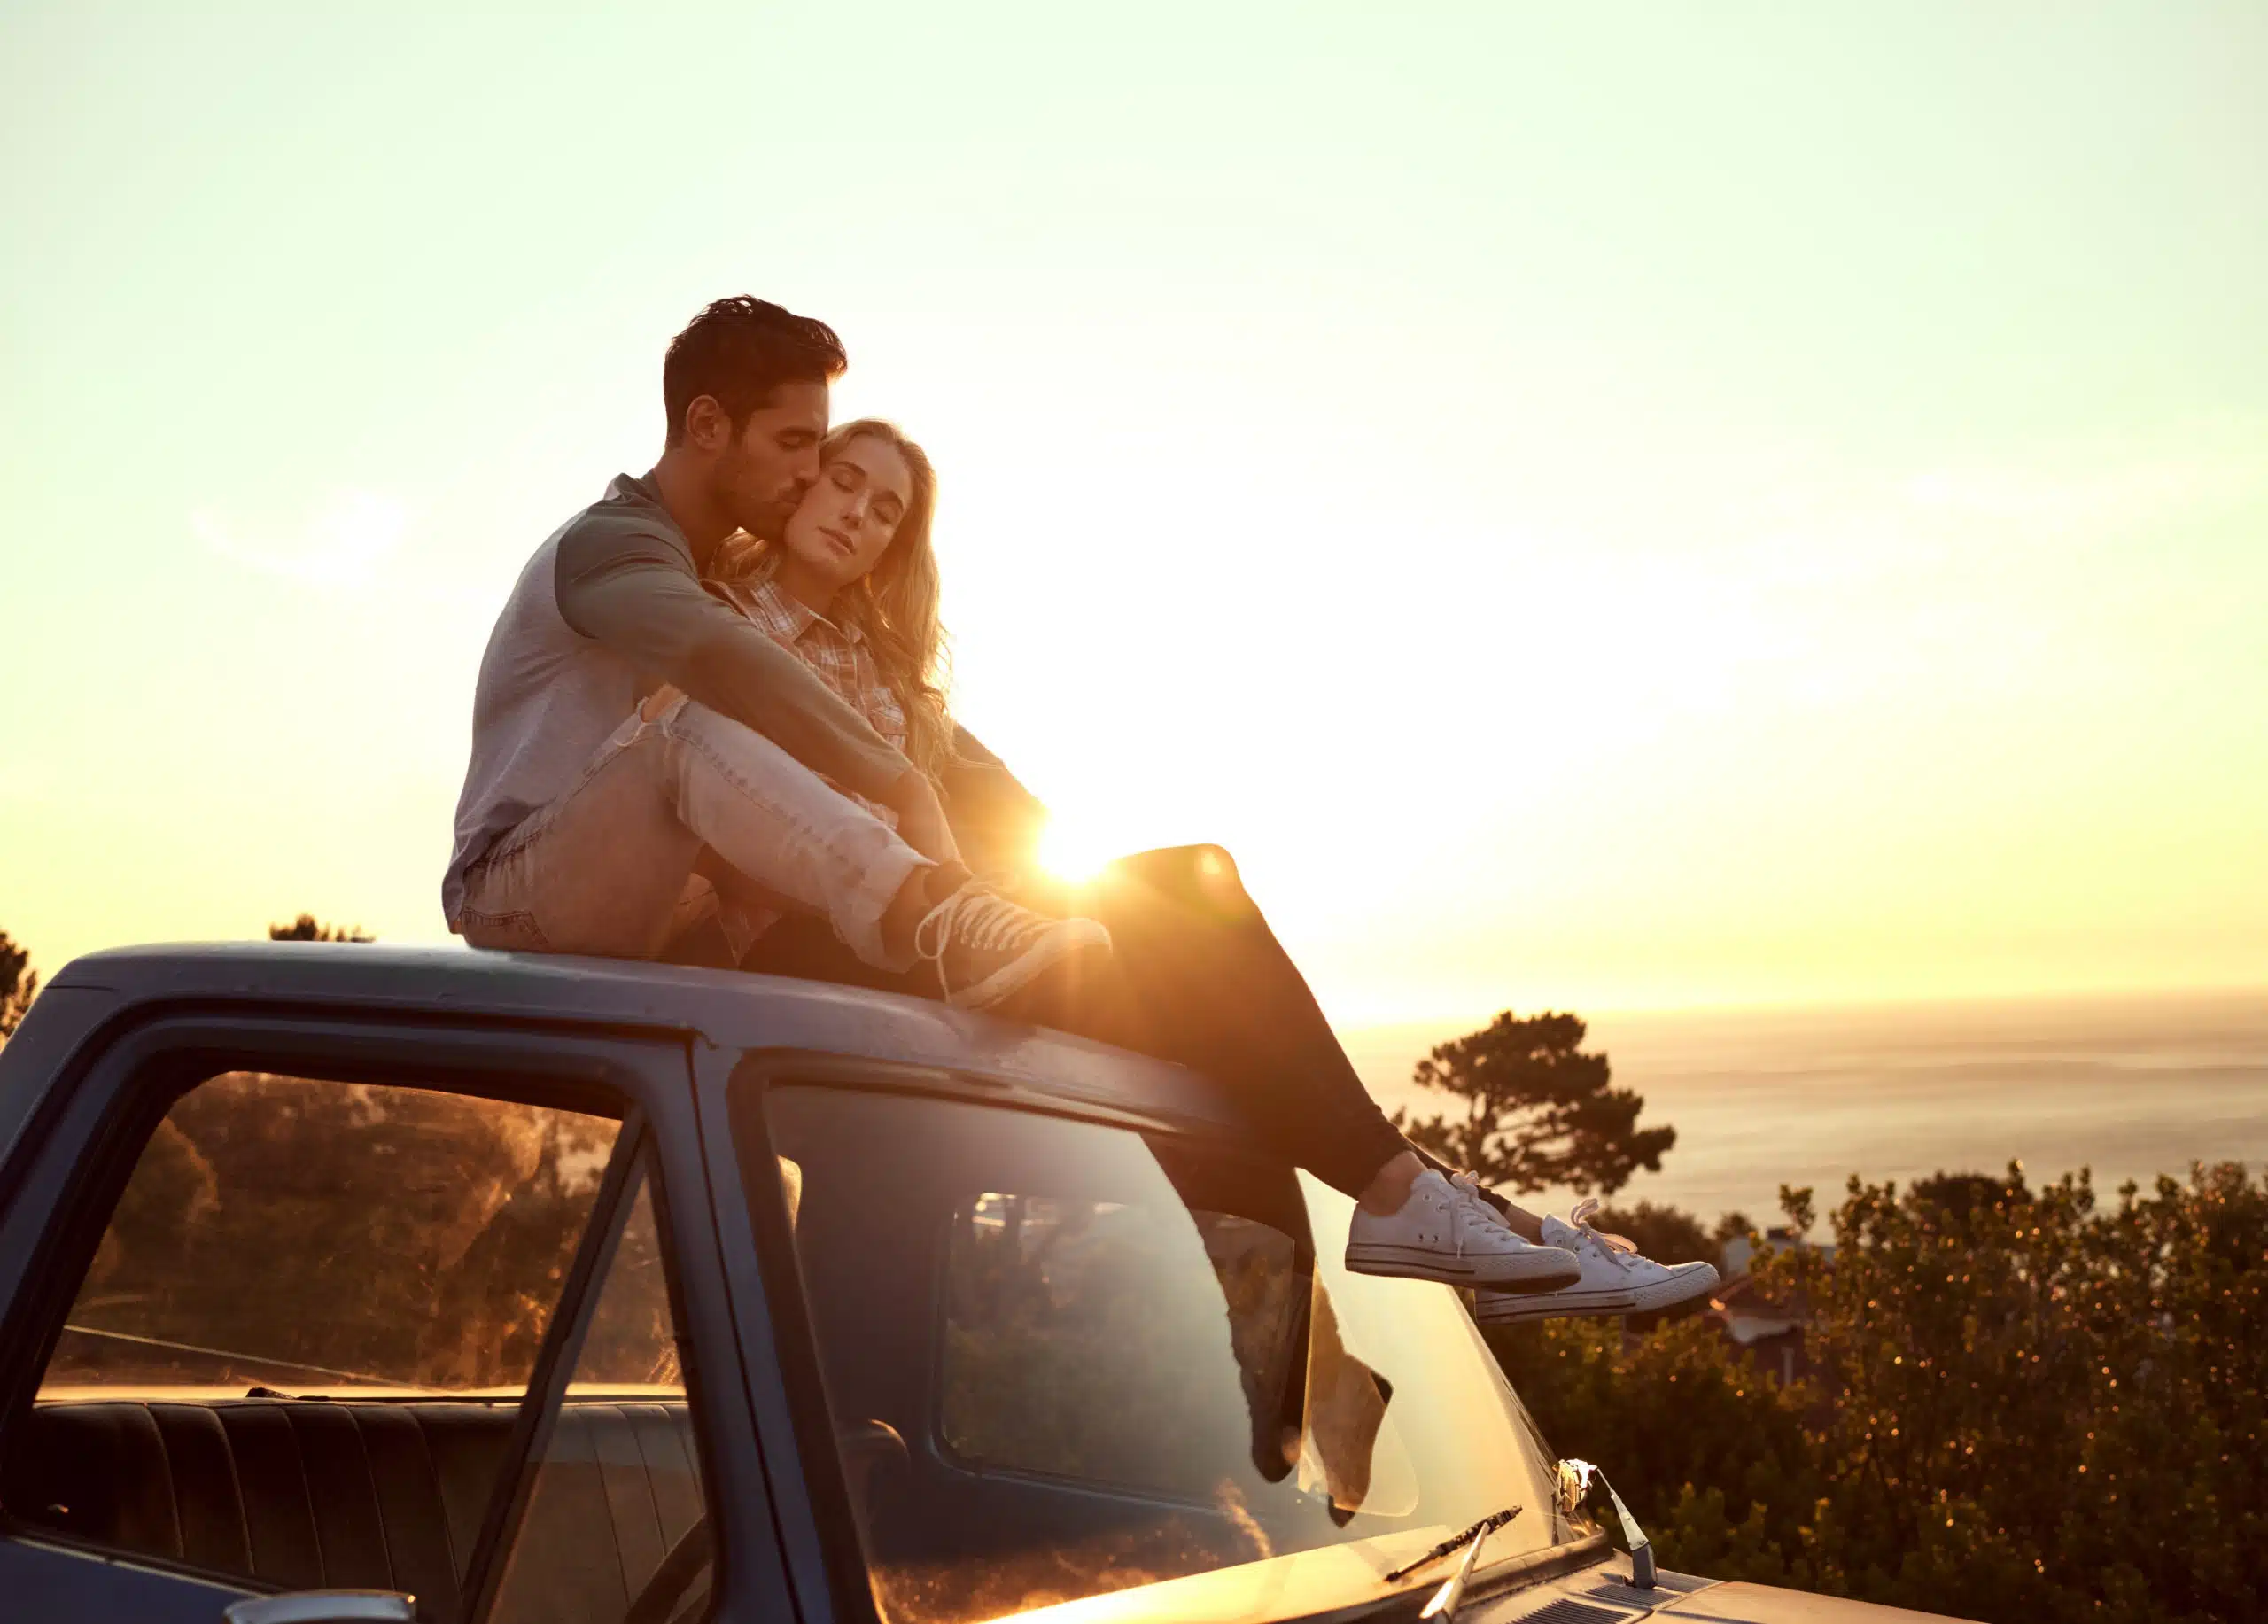 Romance on the road, affectionate young couple enjoying a road trip together.